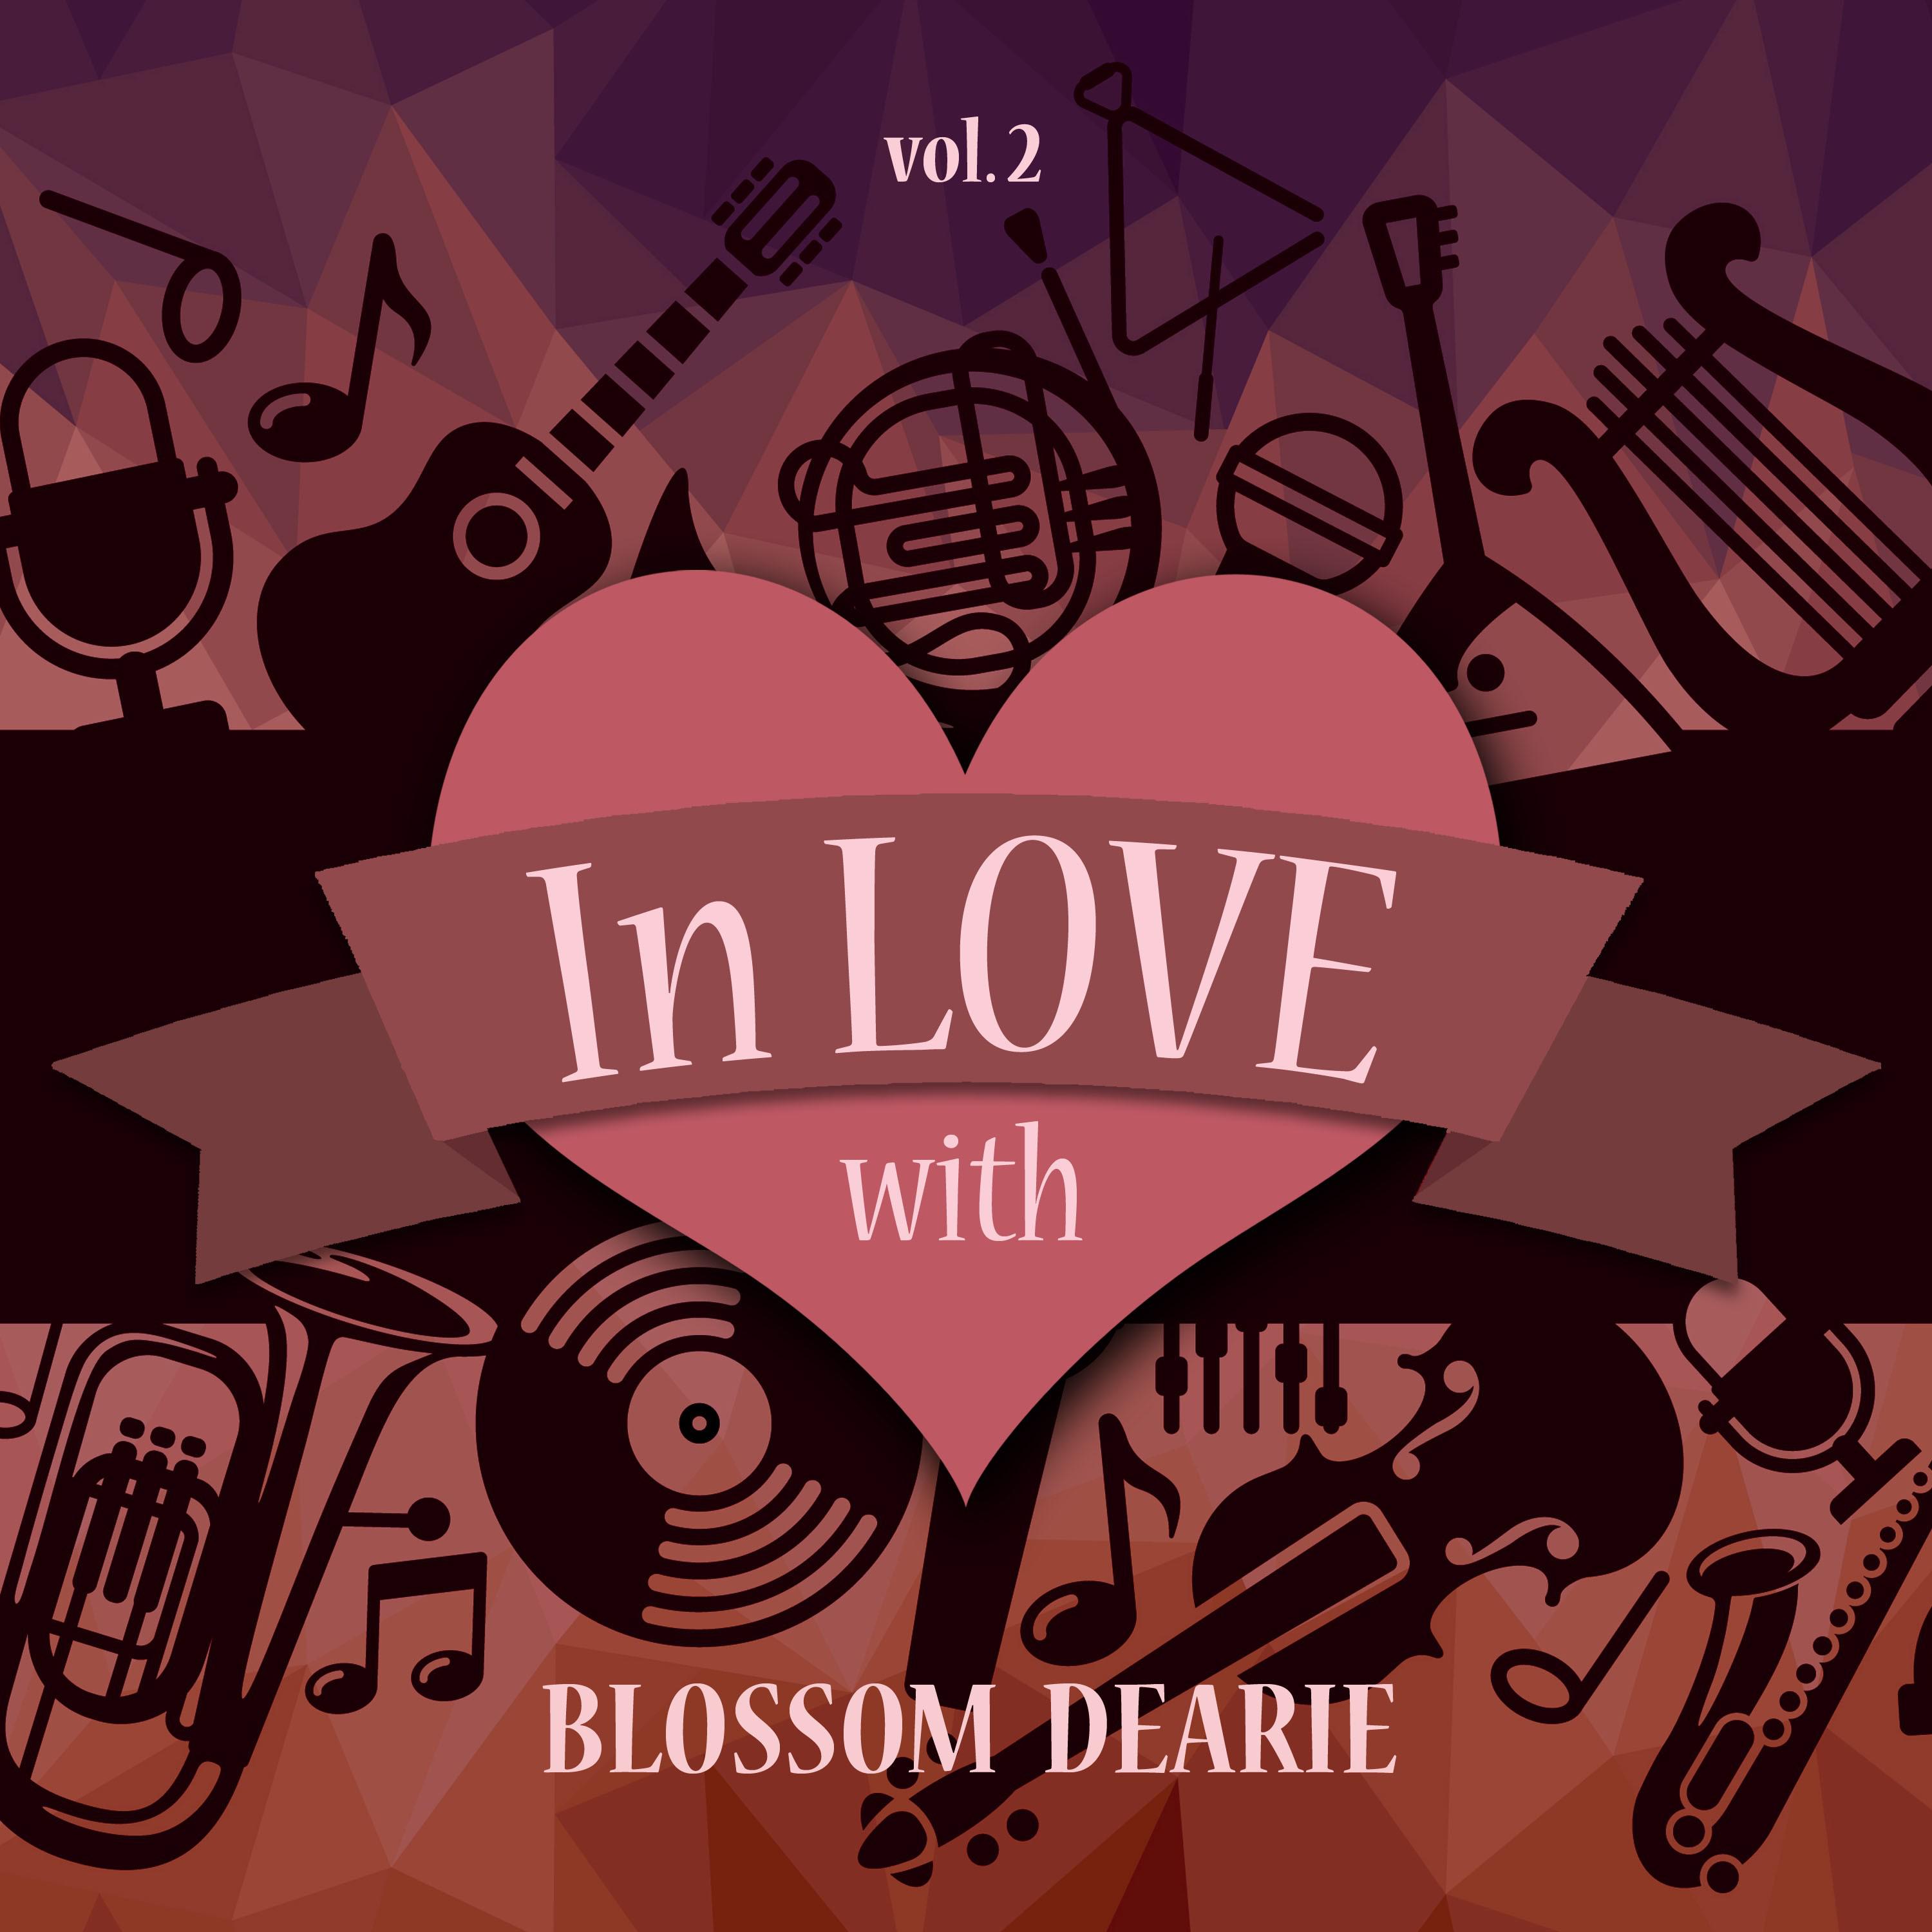 In Love with Blossom Dearie, Vol. 2